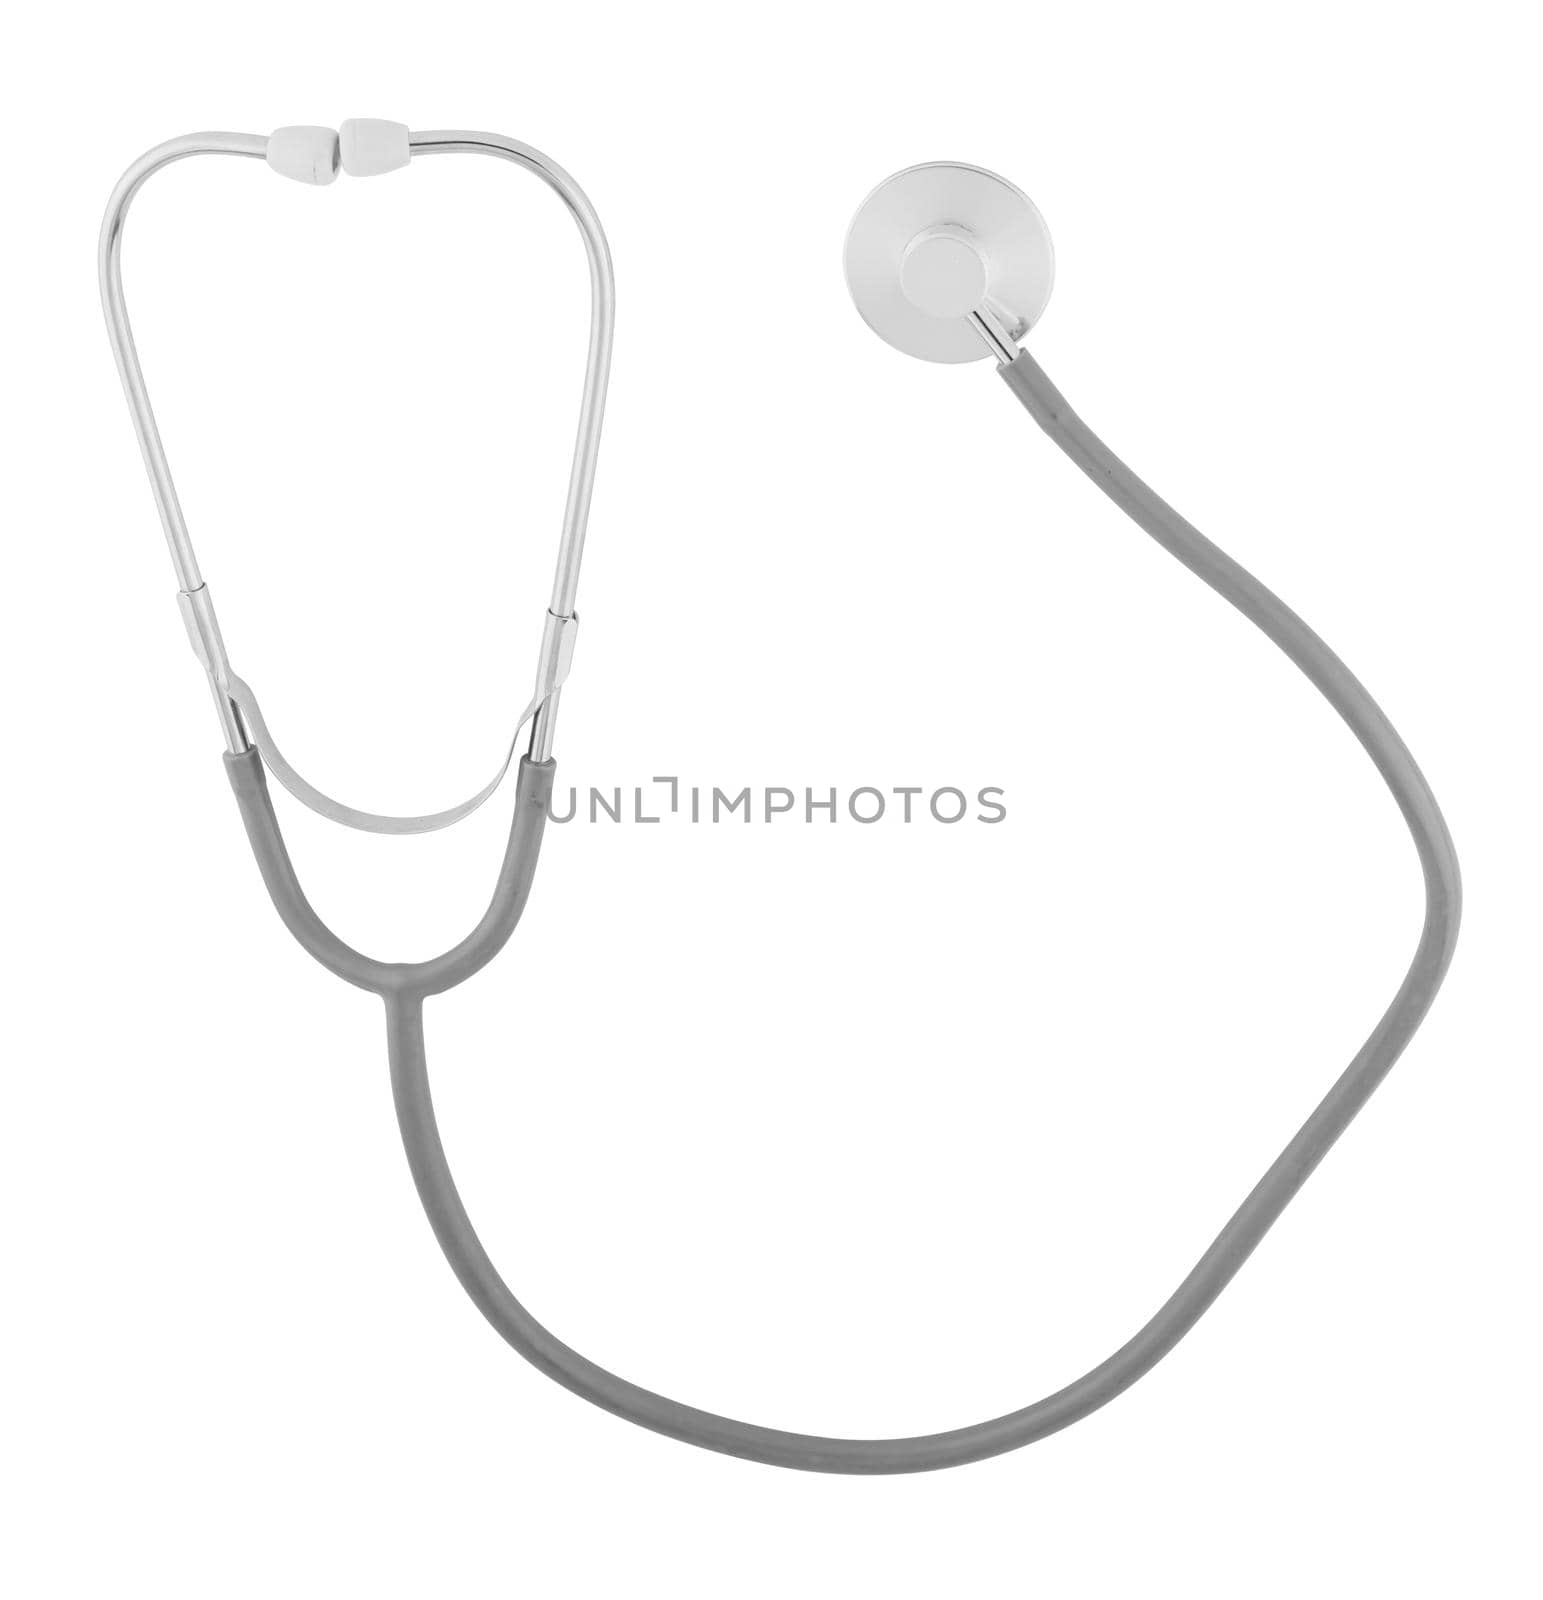 Stethophonendoscope, a medical diagnostic device, on a white background in isolation by A_A